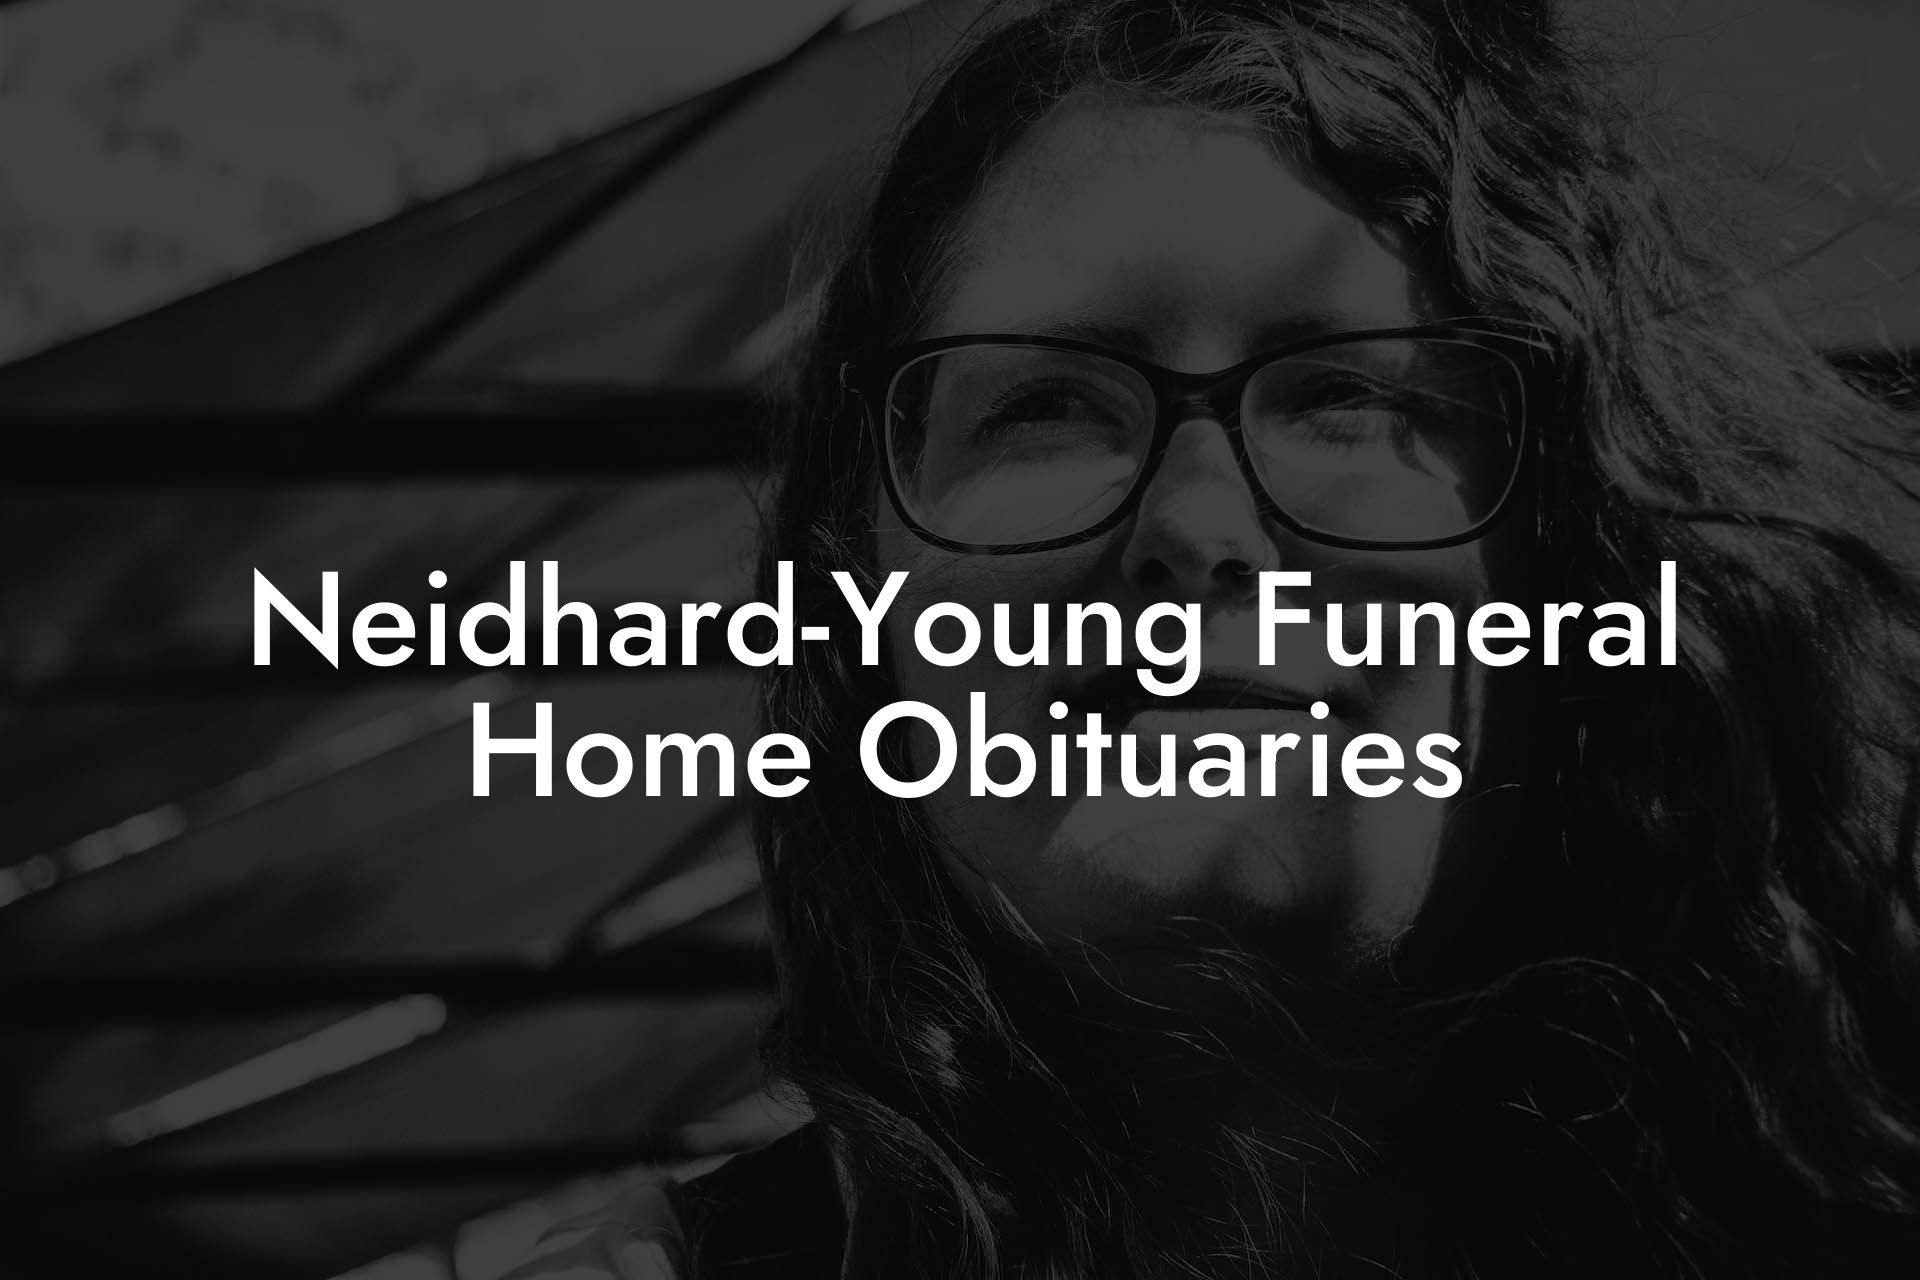 Neidhard-Young Funeral Home Obituaries